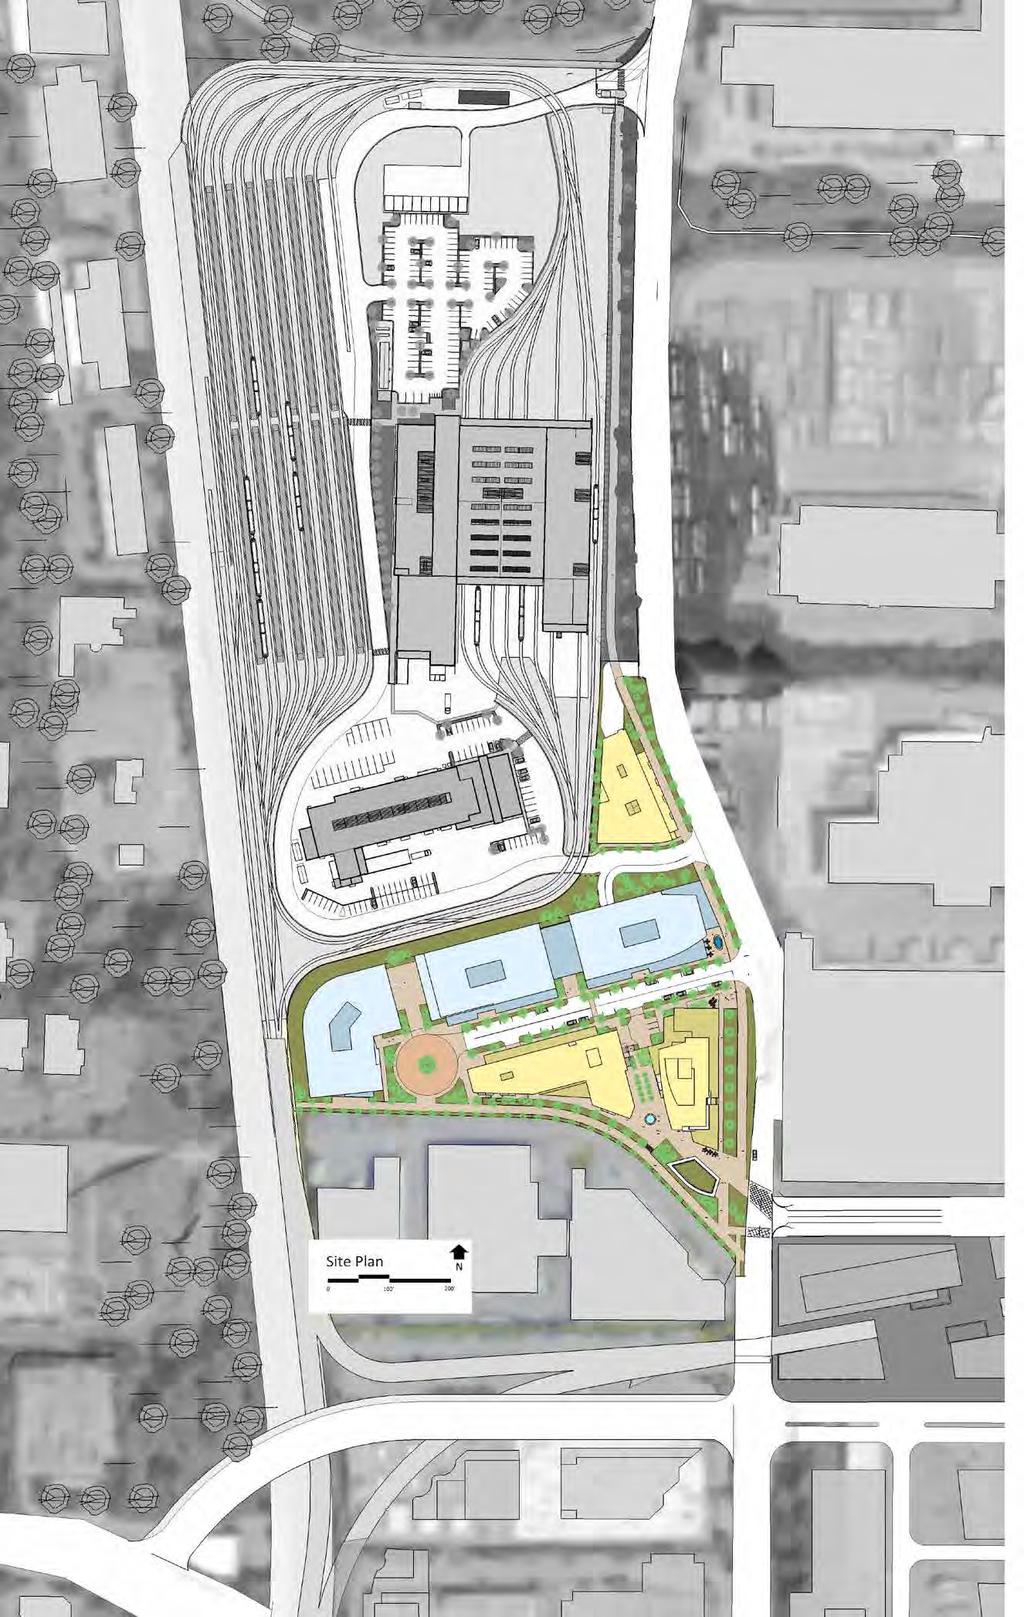 TOD IN OMF EAST MASTER DEVELOPMENT PLAN PLAN ERC North Connection Future BPS Elementary School Zoning: 120th Ave